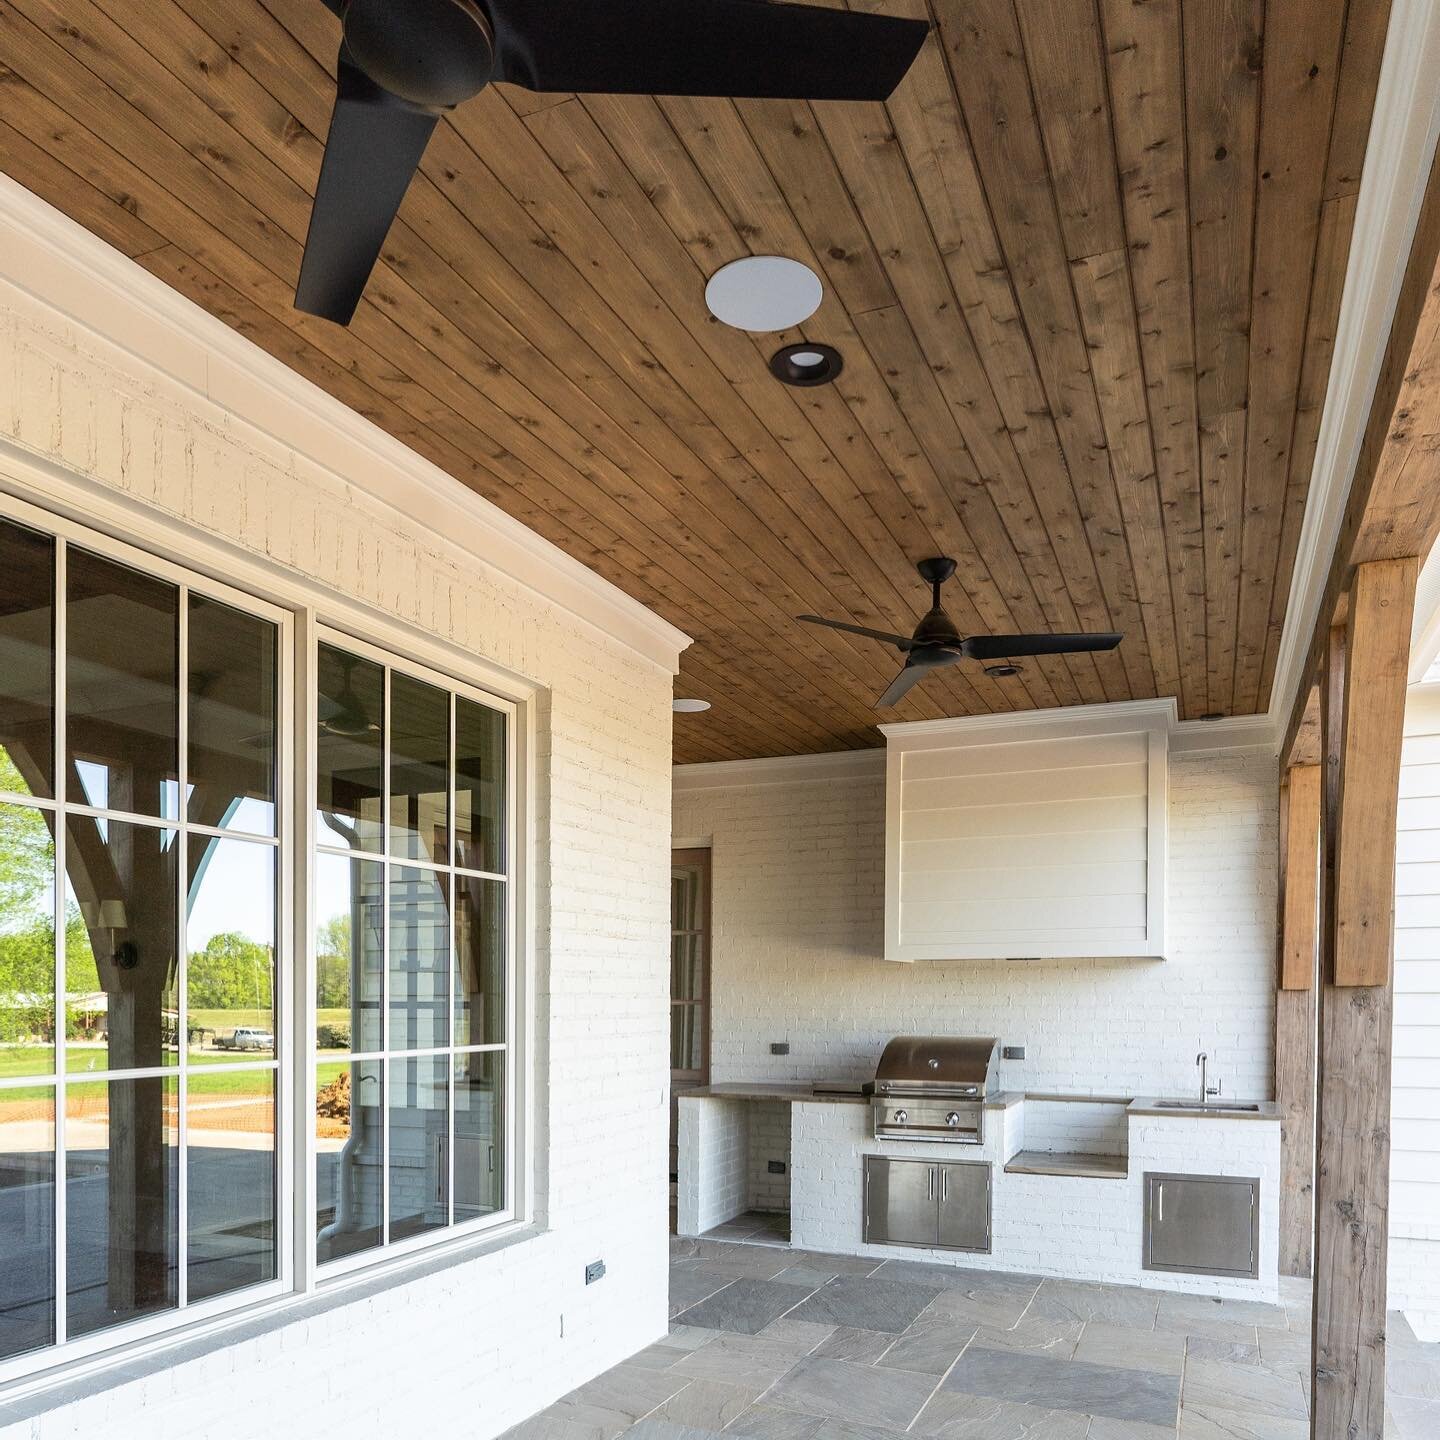 Outdoor kitchens are an extension of the home. ⁠
⁠
#EllerConstruction #homebuilder #colliervillehomebuilder #collierville #dreamhomebuilder #customhomebuilder #custombuilt #dreamhome  #customhomescollierville#customhomebuilding #newconstruction #cust